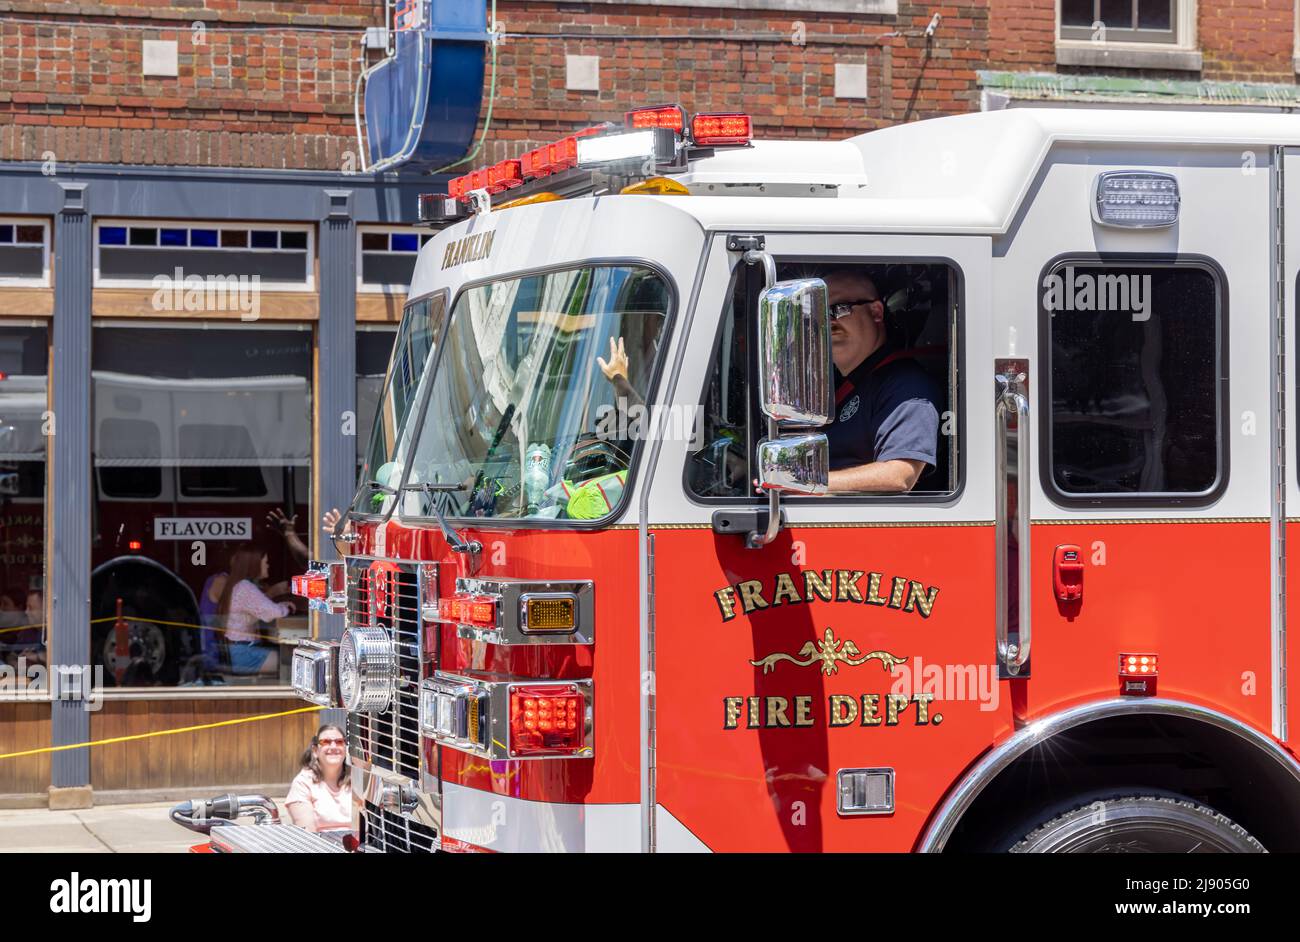 Detail image of a fireman in a Franklin Fire Dept fire truck Stock Photo